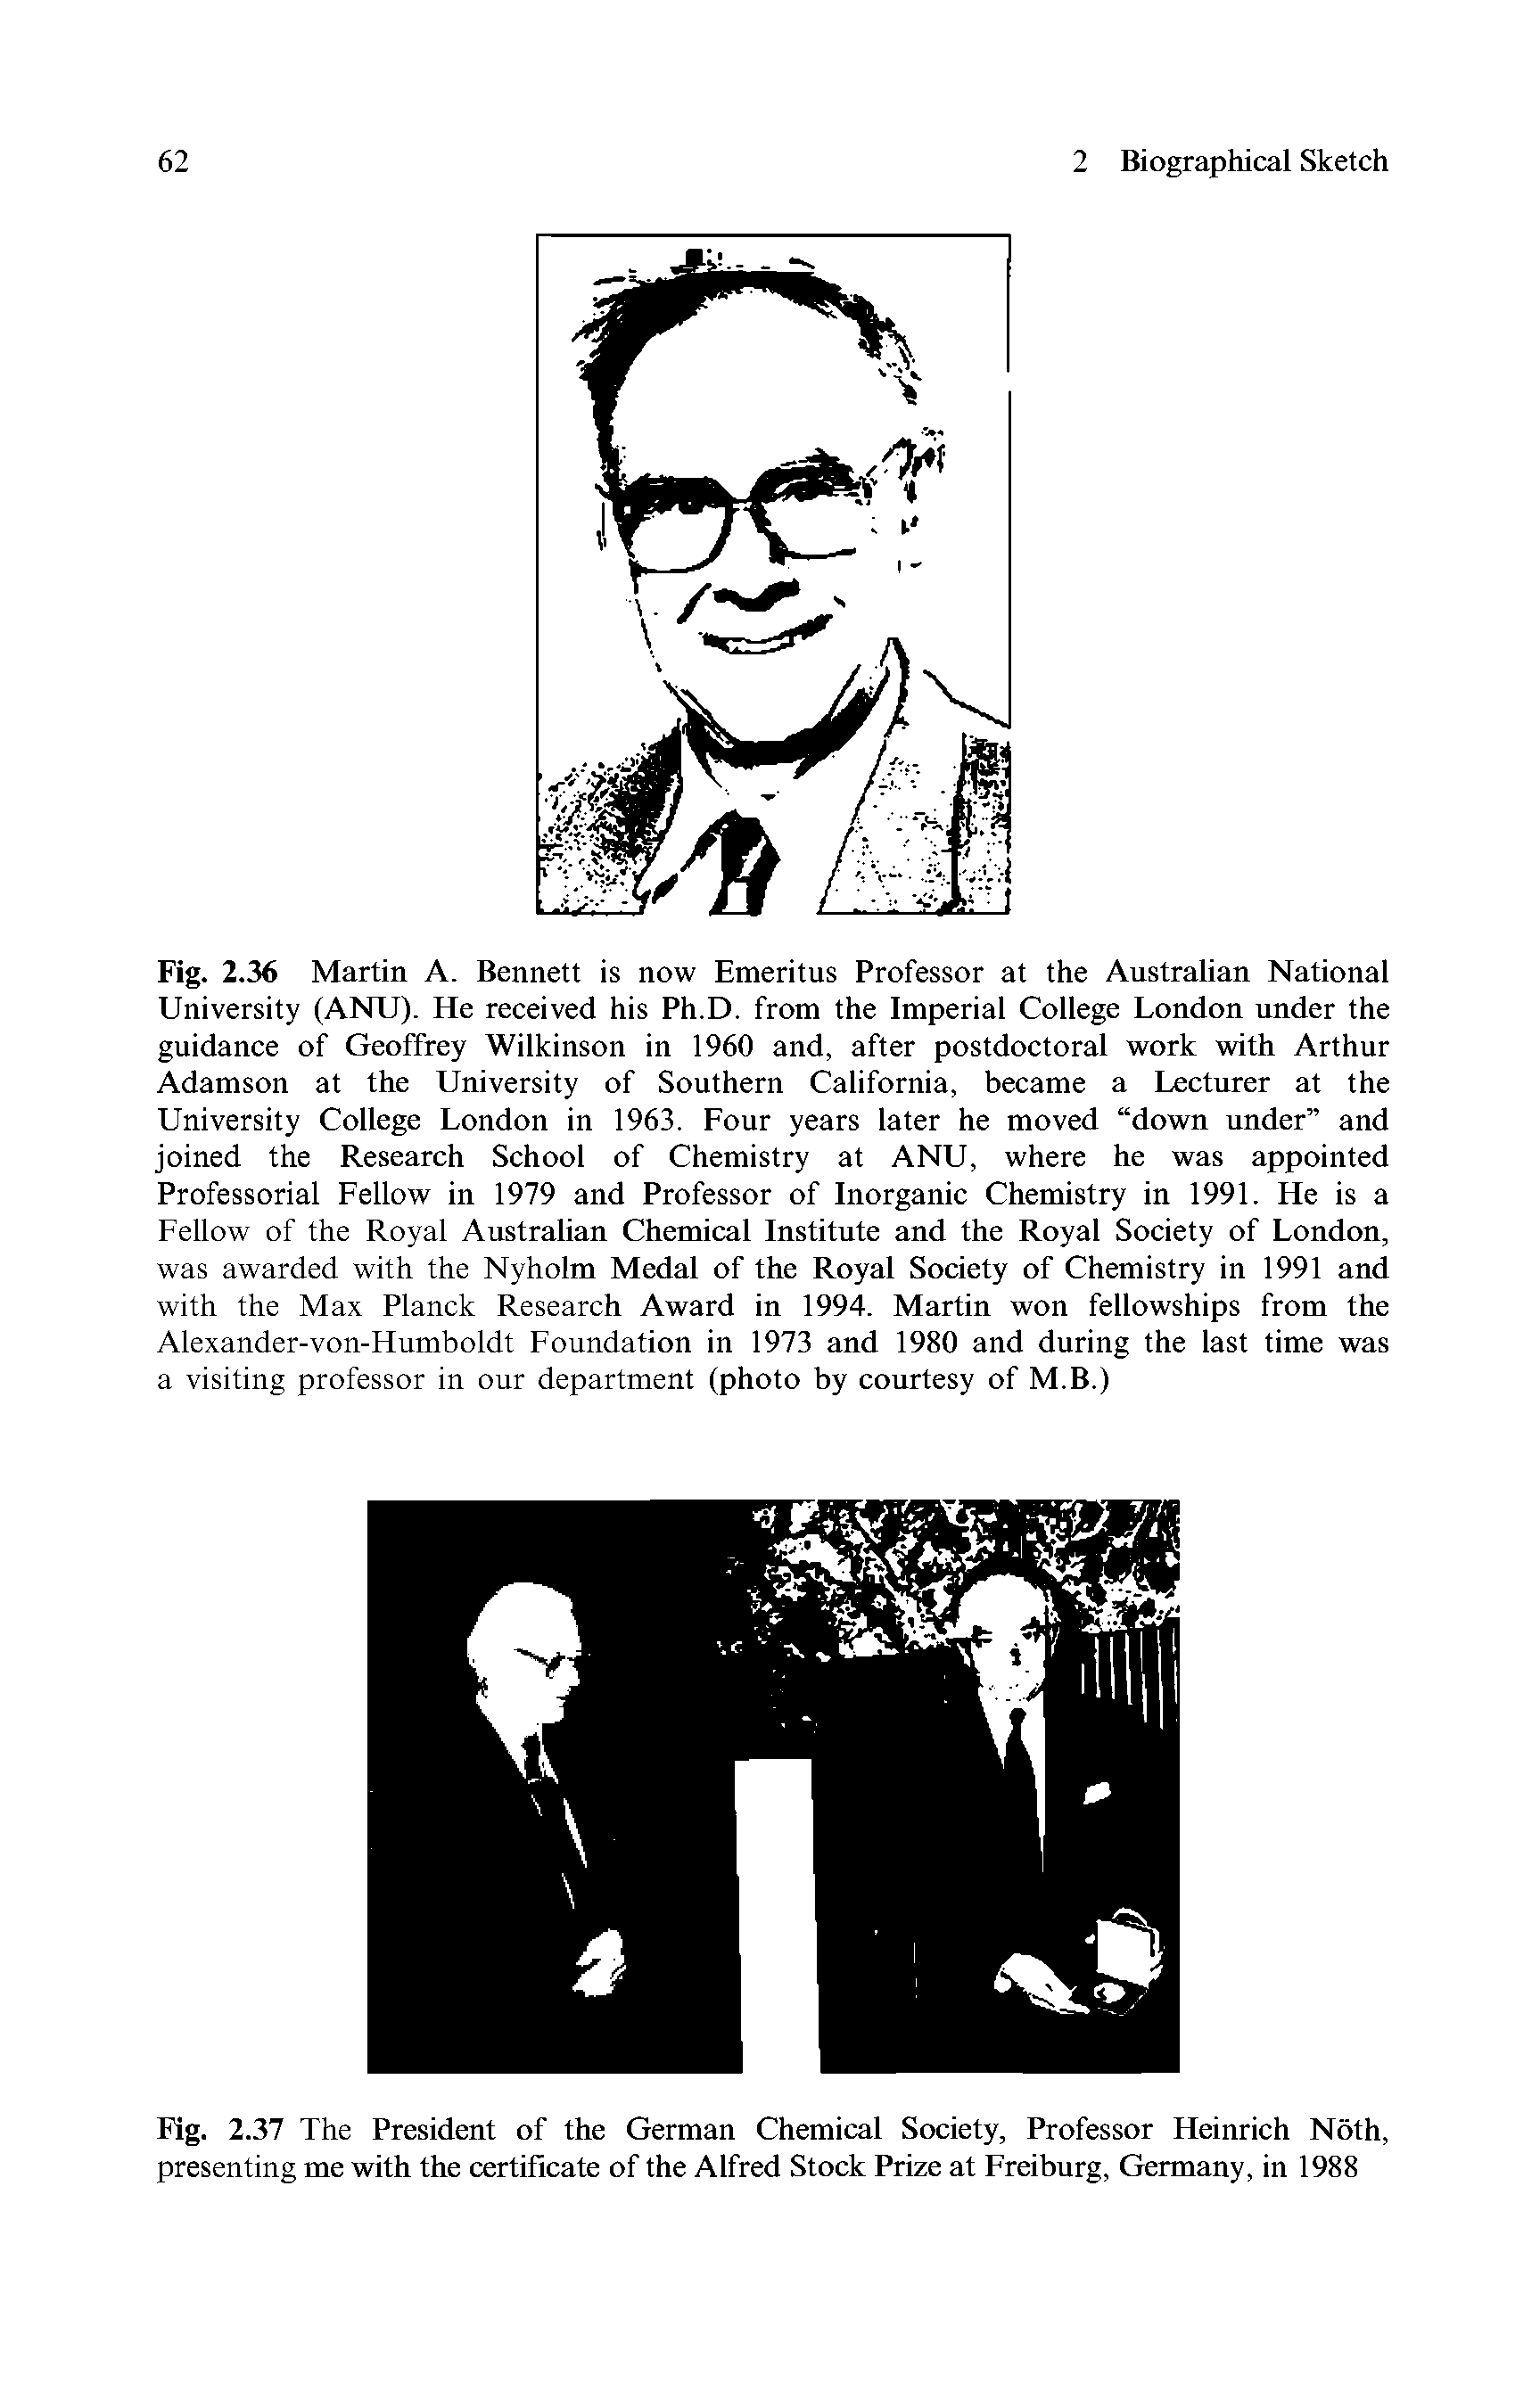 Fig. 2.36 Martin A. Bennett is now Emeritus Professor at the Australian National University (ANU). He received his Ph.D. from the Imperial College London under the guidance of Geoffrey Wilkinson in 1960 and, after postdoctoral work with Arthur Adamson at the University of Southern California, became a Lecturer at the University College London in 1963. Four years later he moved down under and joined the Research School of Chemistry at ANU, where he was appointed Professorial Fellow in 1979 and Professor of Inorganic Chemistry in 1991. He is a Fellow of the Royal Australian Chemical Institute and the Royal Society of London, was awarded with the Nyholm Medal of the Royal Society of Chemistry in 1991 and with the Max Planck Research Award in 1994. Martin won fellowships from the Alexander-von-Humboldt Foundation in 1973 and 1980 and during the last time was a visiting professor in our department (photo by courtesy of M.B.)...